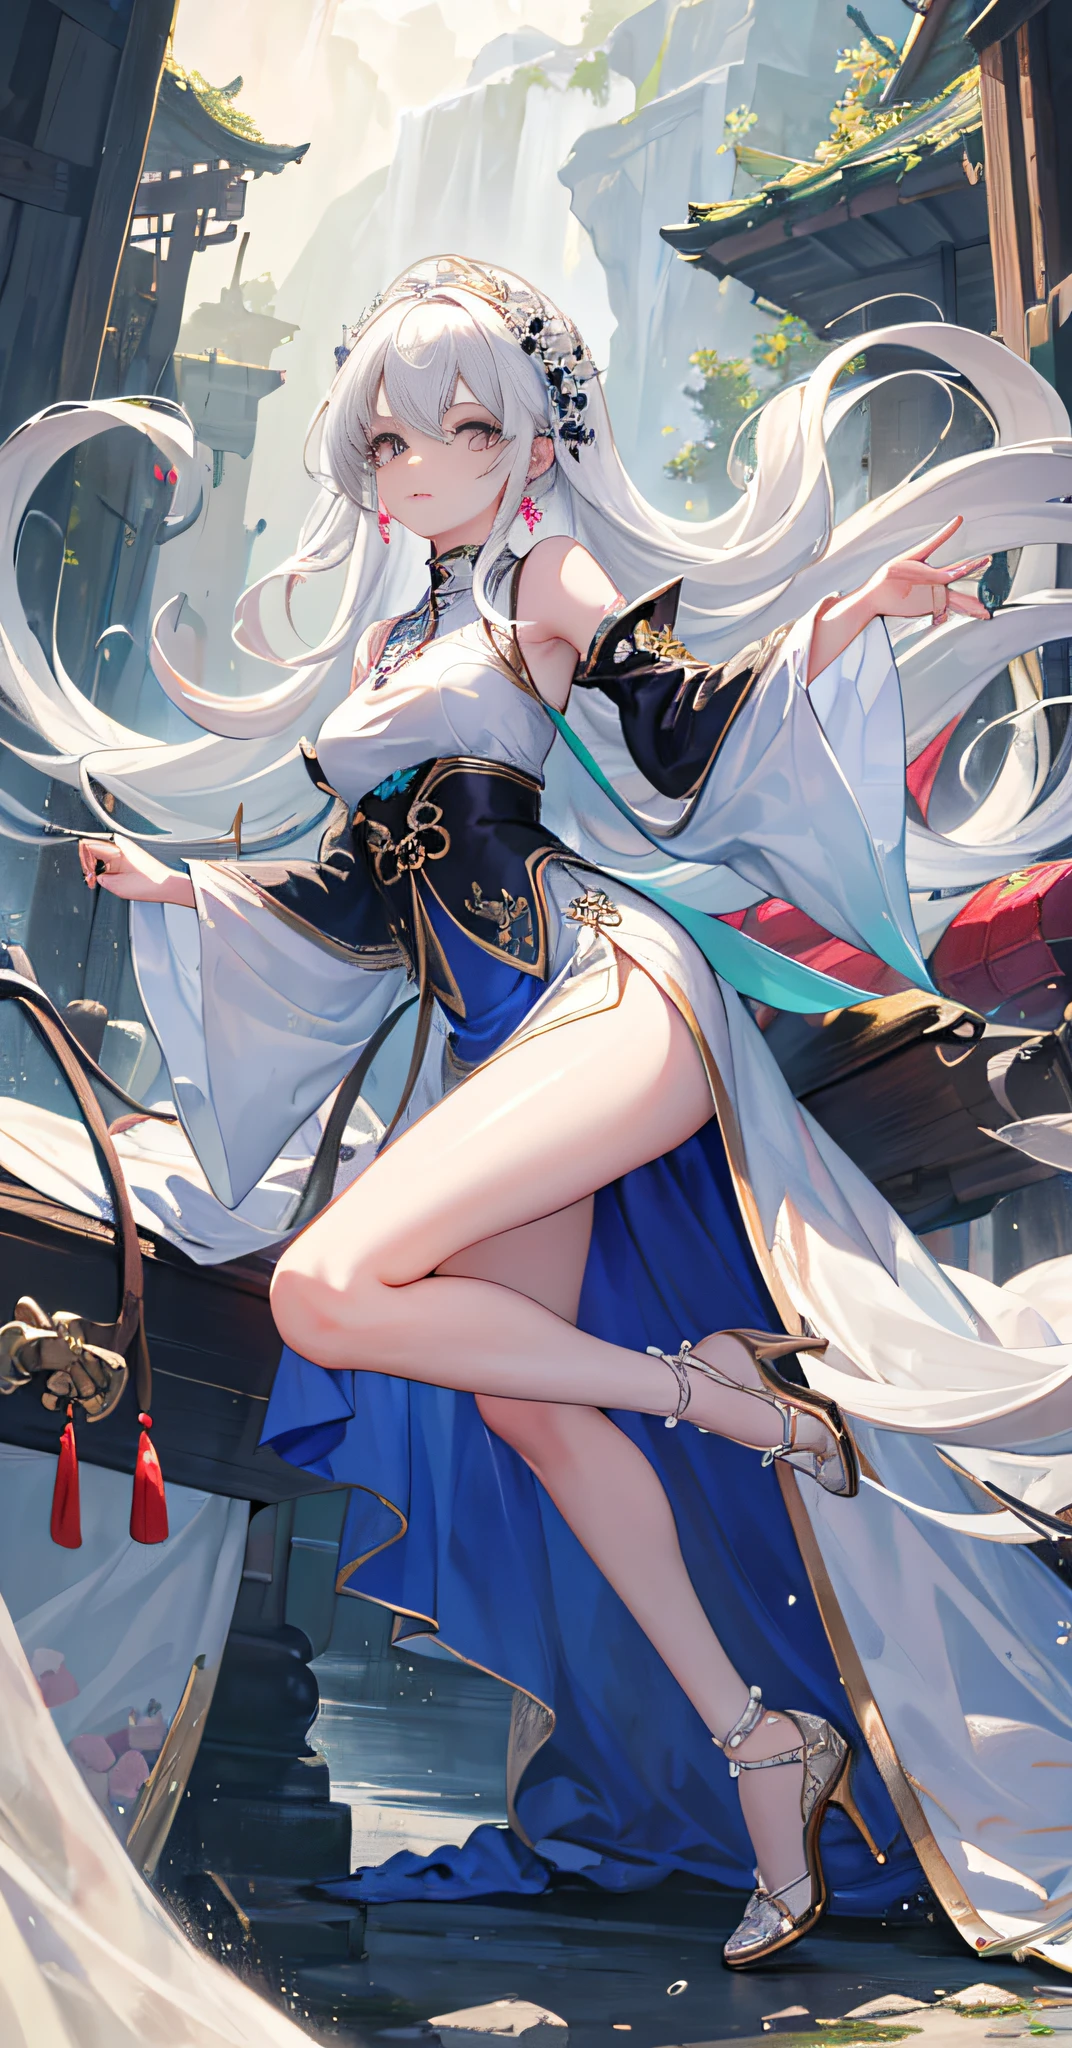 (Best Quality), ((Masterpiece)), (High Resolution), Original, (Very Detailed 8K Wallpaper), Overexposed, 1girl, (Medium Tits), (Extremely Delicate and Beautiful), (Beautiful and Detailed Eye Description), (Beautiful and Detailed Facial Depiction), (Solo), (Slender Legs, High Heels), Behind the Arm, Rain Skirt, Hair Accessories, Necklaces, Jewelry, Earrings, Chinese Style Architecture, Wavy Hair, Messy Hair, Long White Hair, , Masterpiece, Best Quality, Transparent Silk Cost, Kawaii's face, anime, transparent multicolored clothes, (ulzzang-6500:1.2)